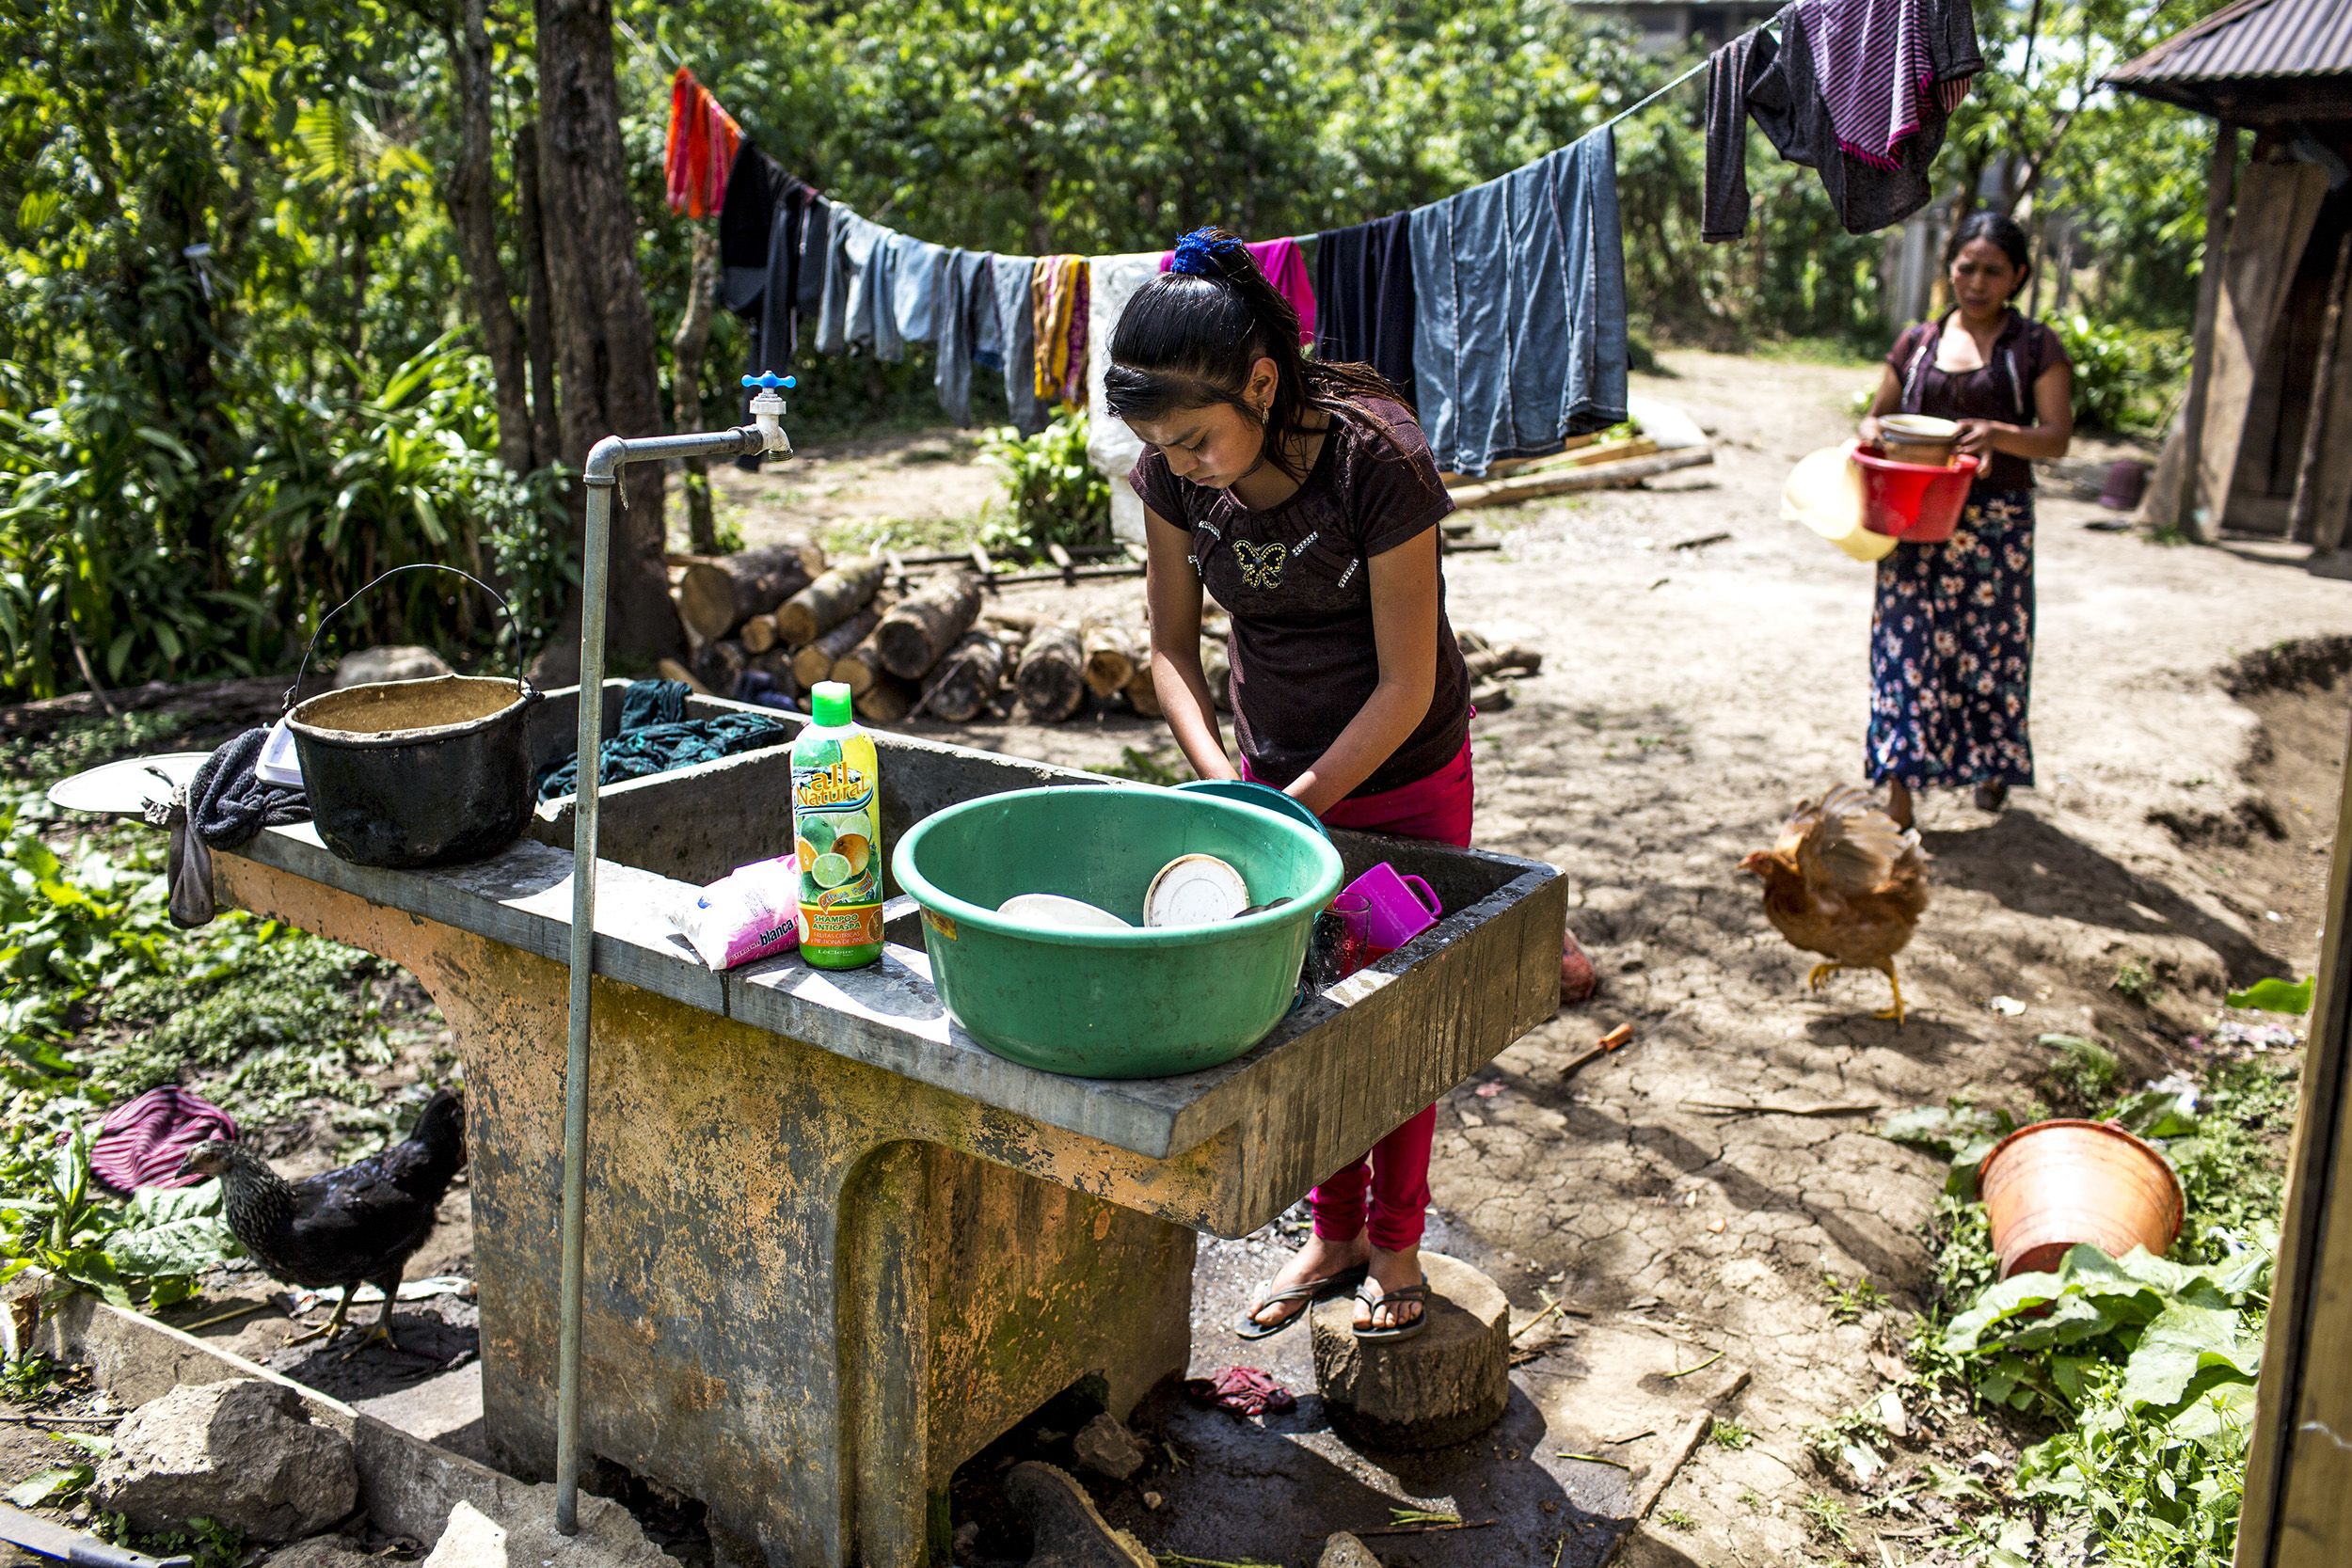 Candelaria López, 15, washes dishes in her front yard in Bulej. Image by Simone Dalmasso/Arizona Daily Star. Guatemala, 2019.